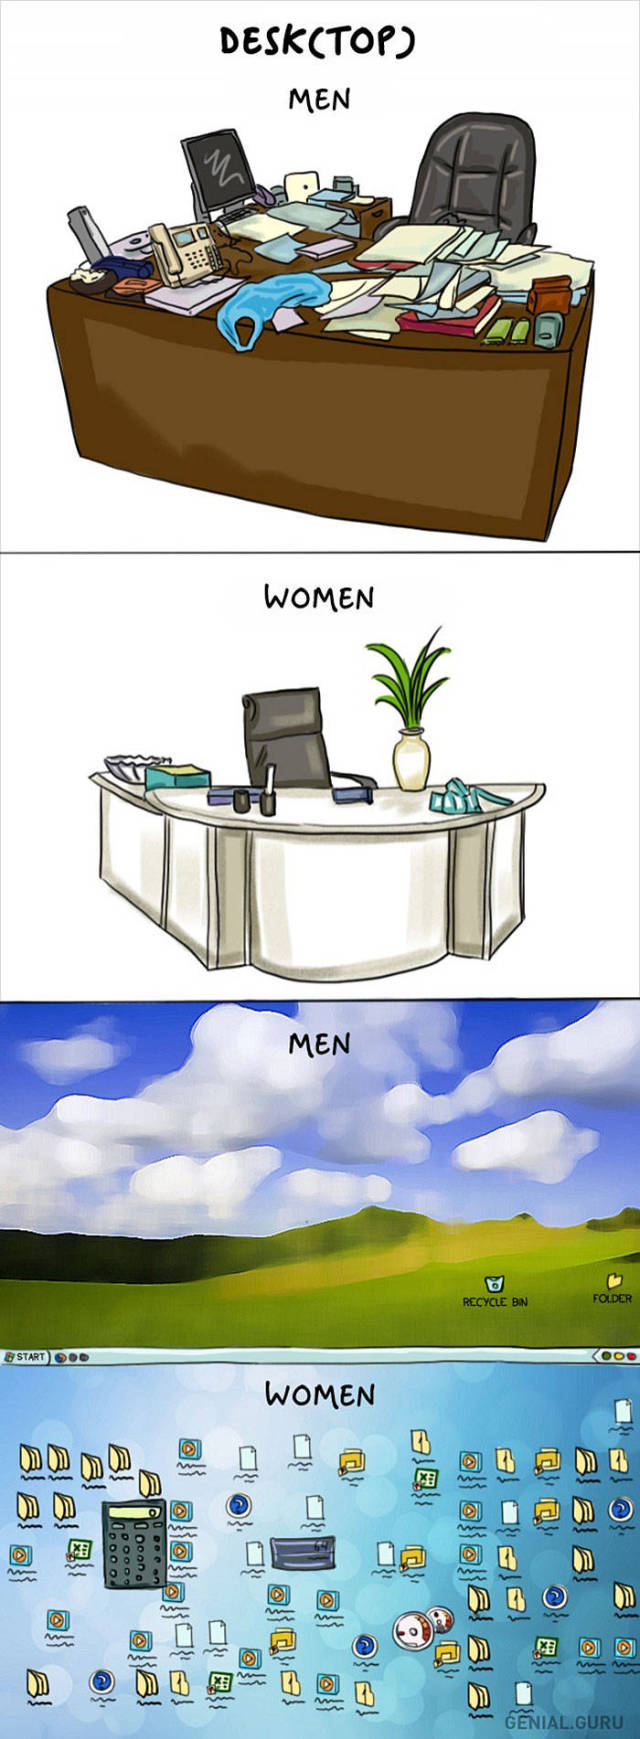 An Illustrated Guide to the Quirky Differences between Men and Women